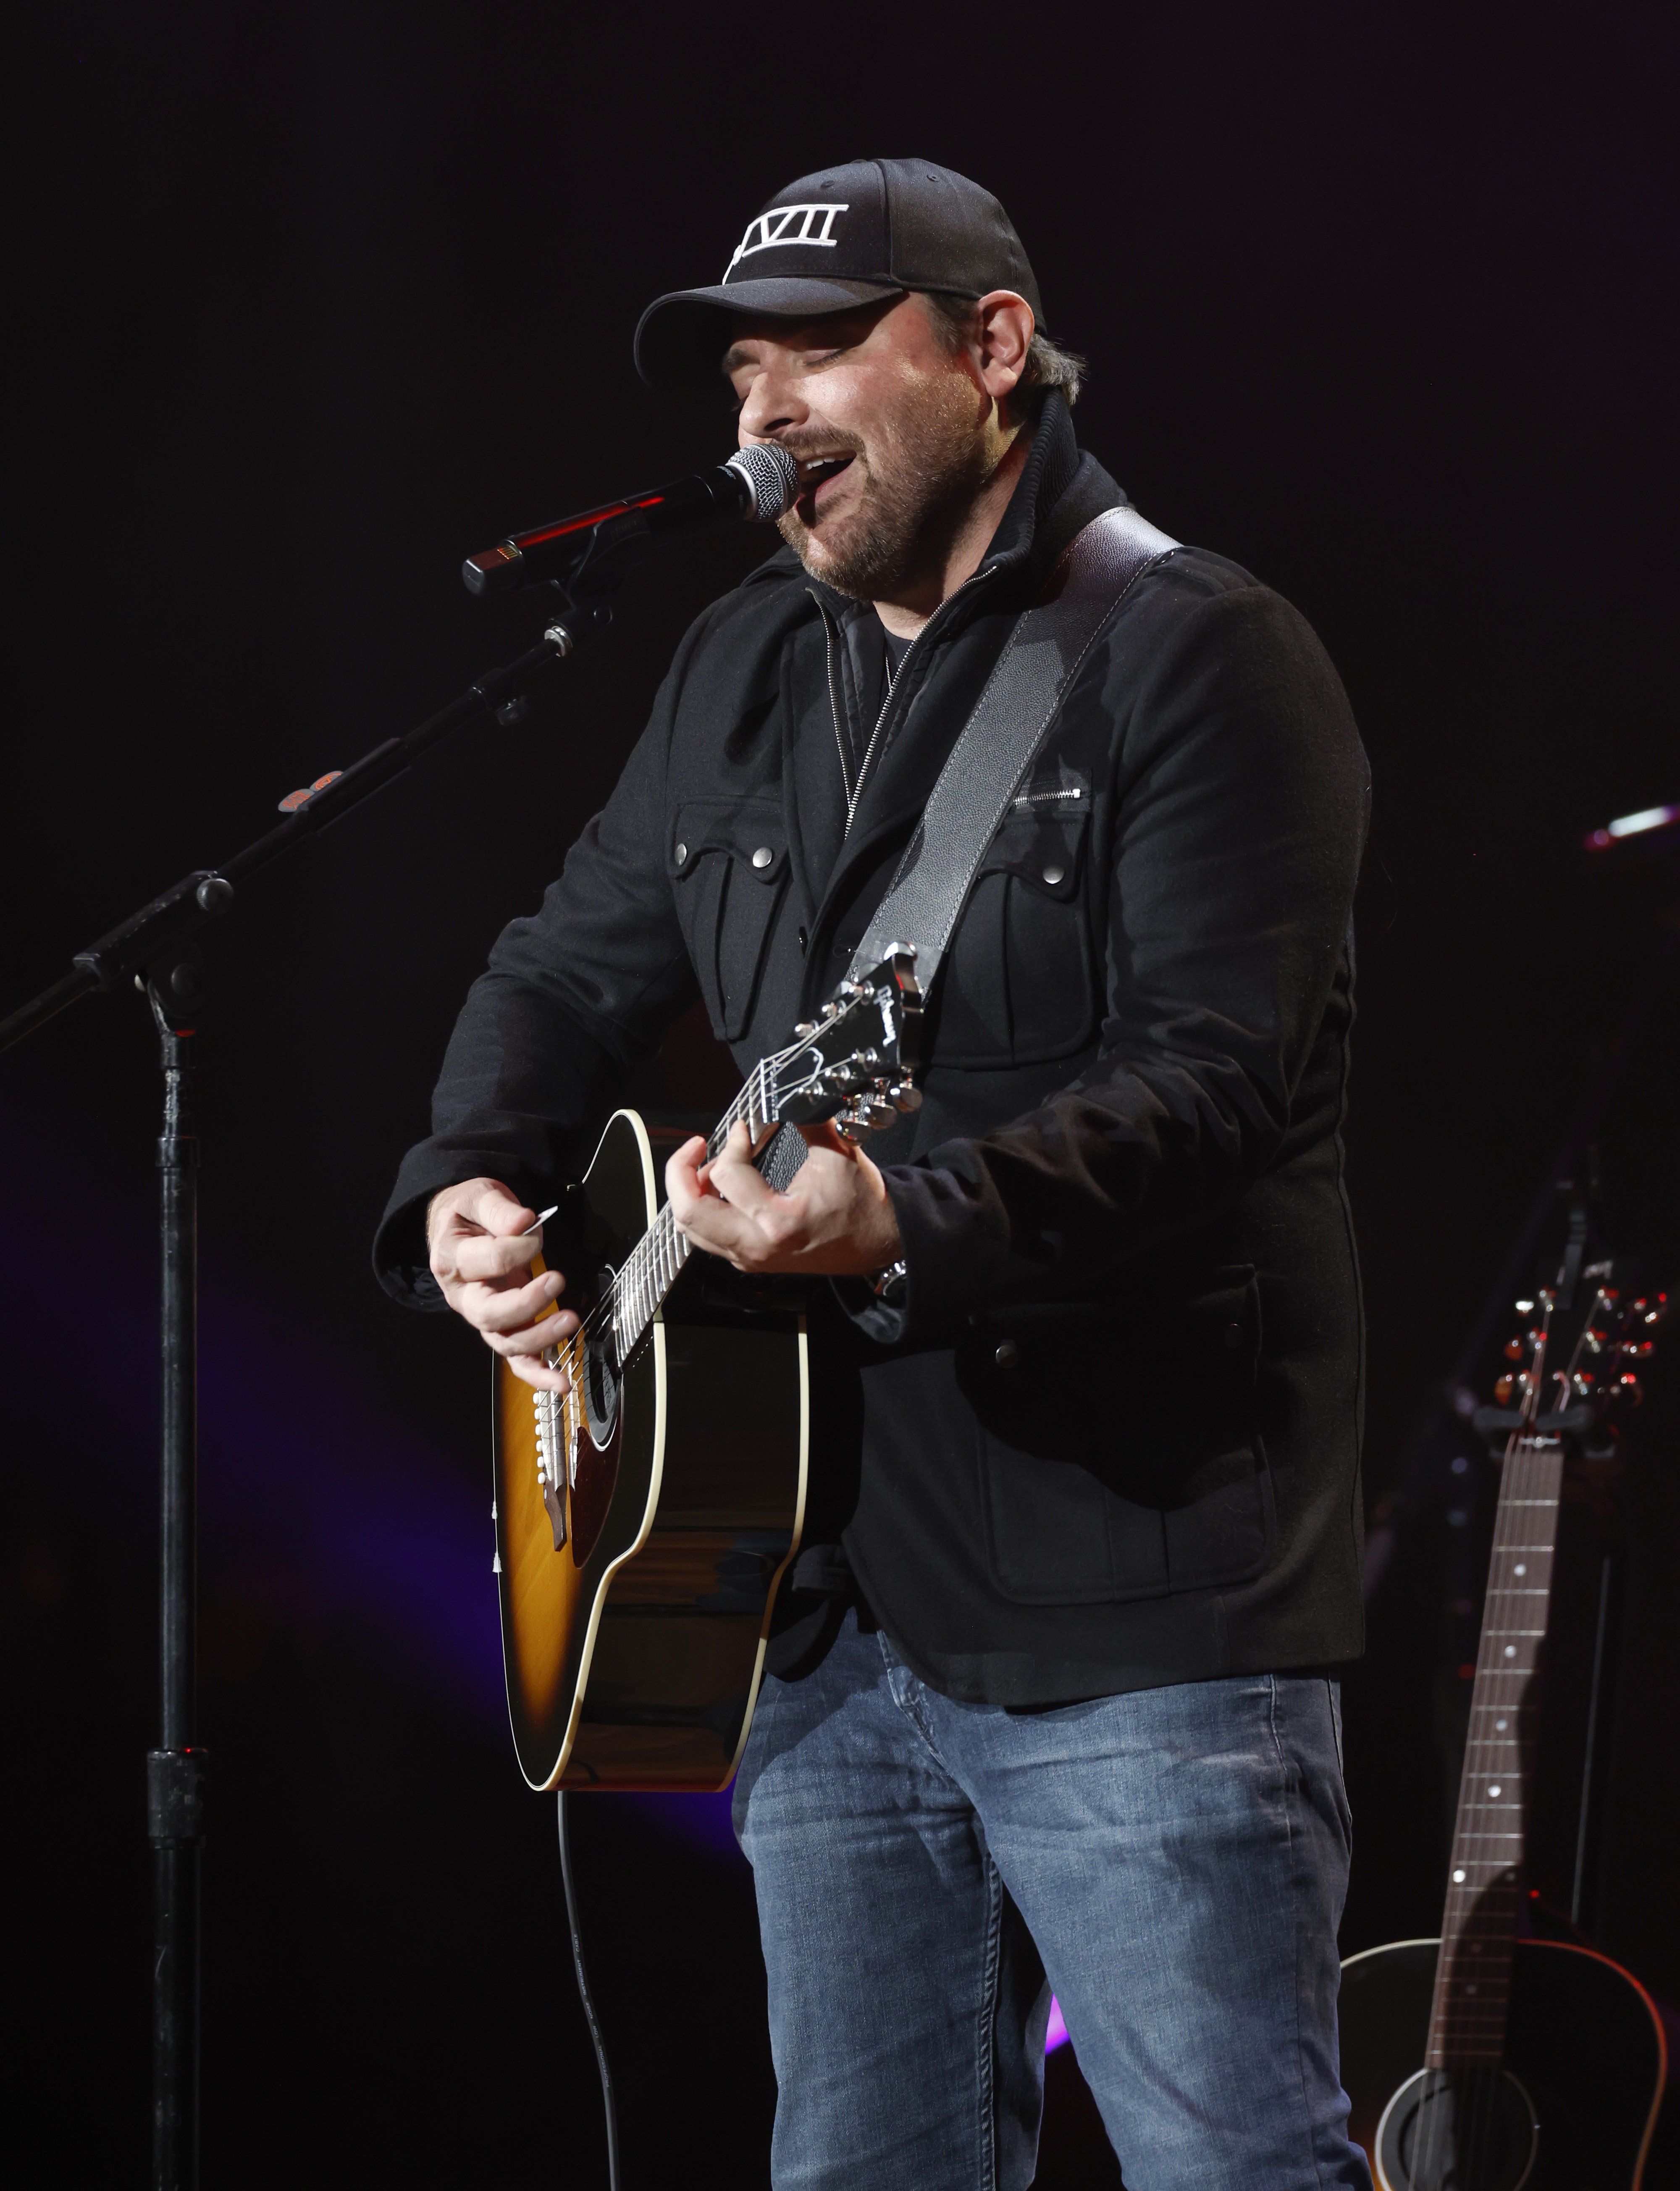 Chris Young performing at the Christmas 4 Kids fundraiser on November 21, 2022, in Nashville, Tennessee. | Source: Getty Images